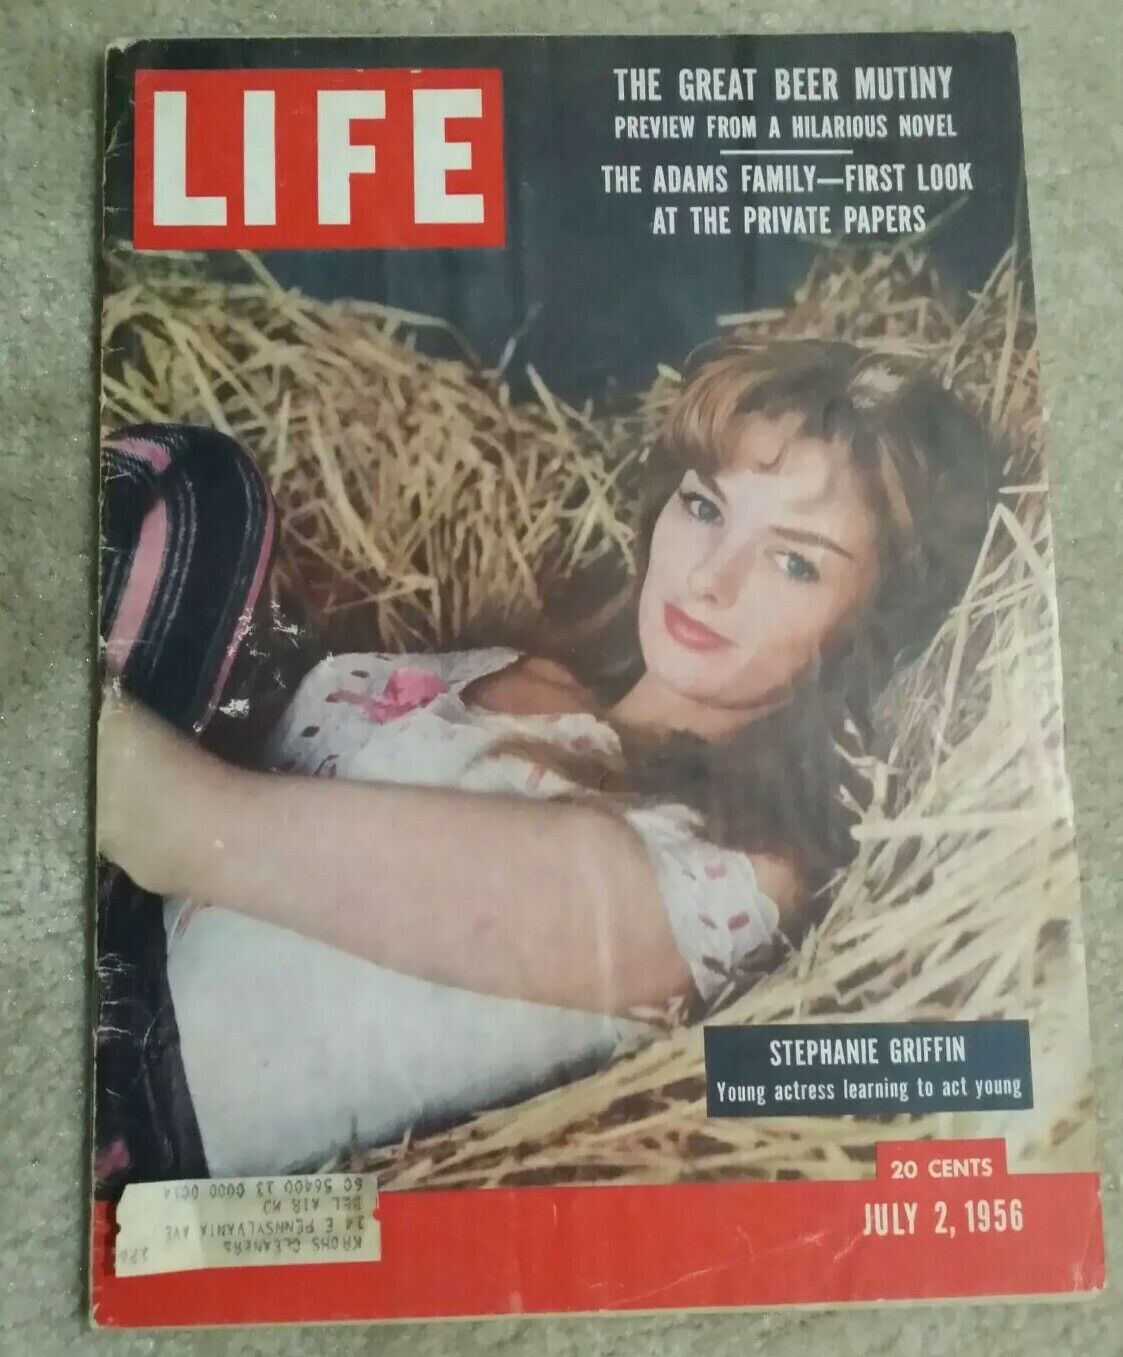 Vintage LIFE Magazine July 2, 1956》Stephanie Griffin, Adams Family, Great Beer